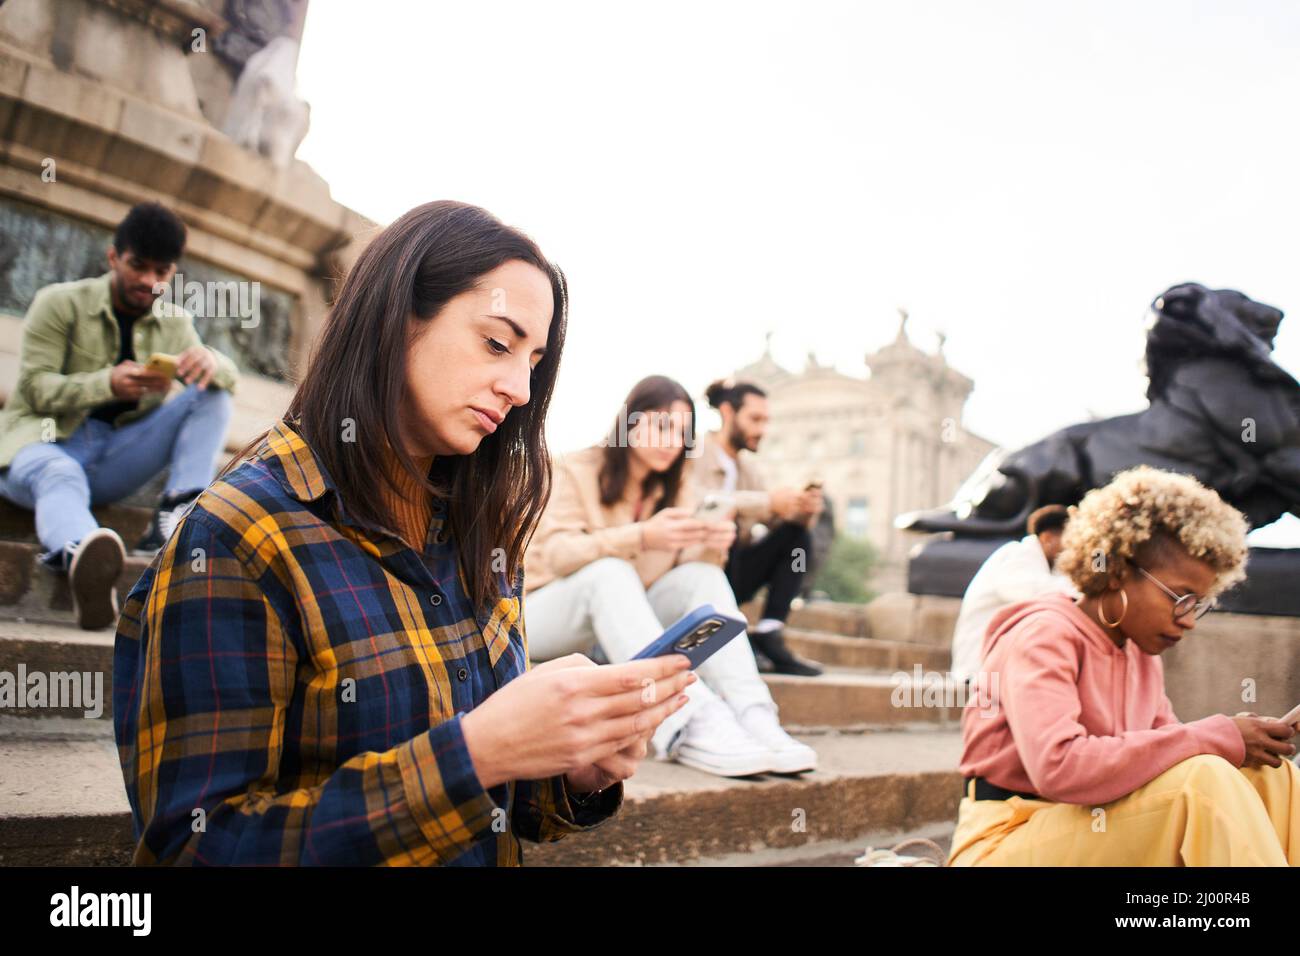 Group of individualistic people using phone outdoors with serious face. Friends focused on their mobiles sitting on a staircase in a city. Technology Stock Photo